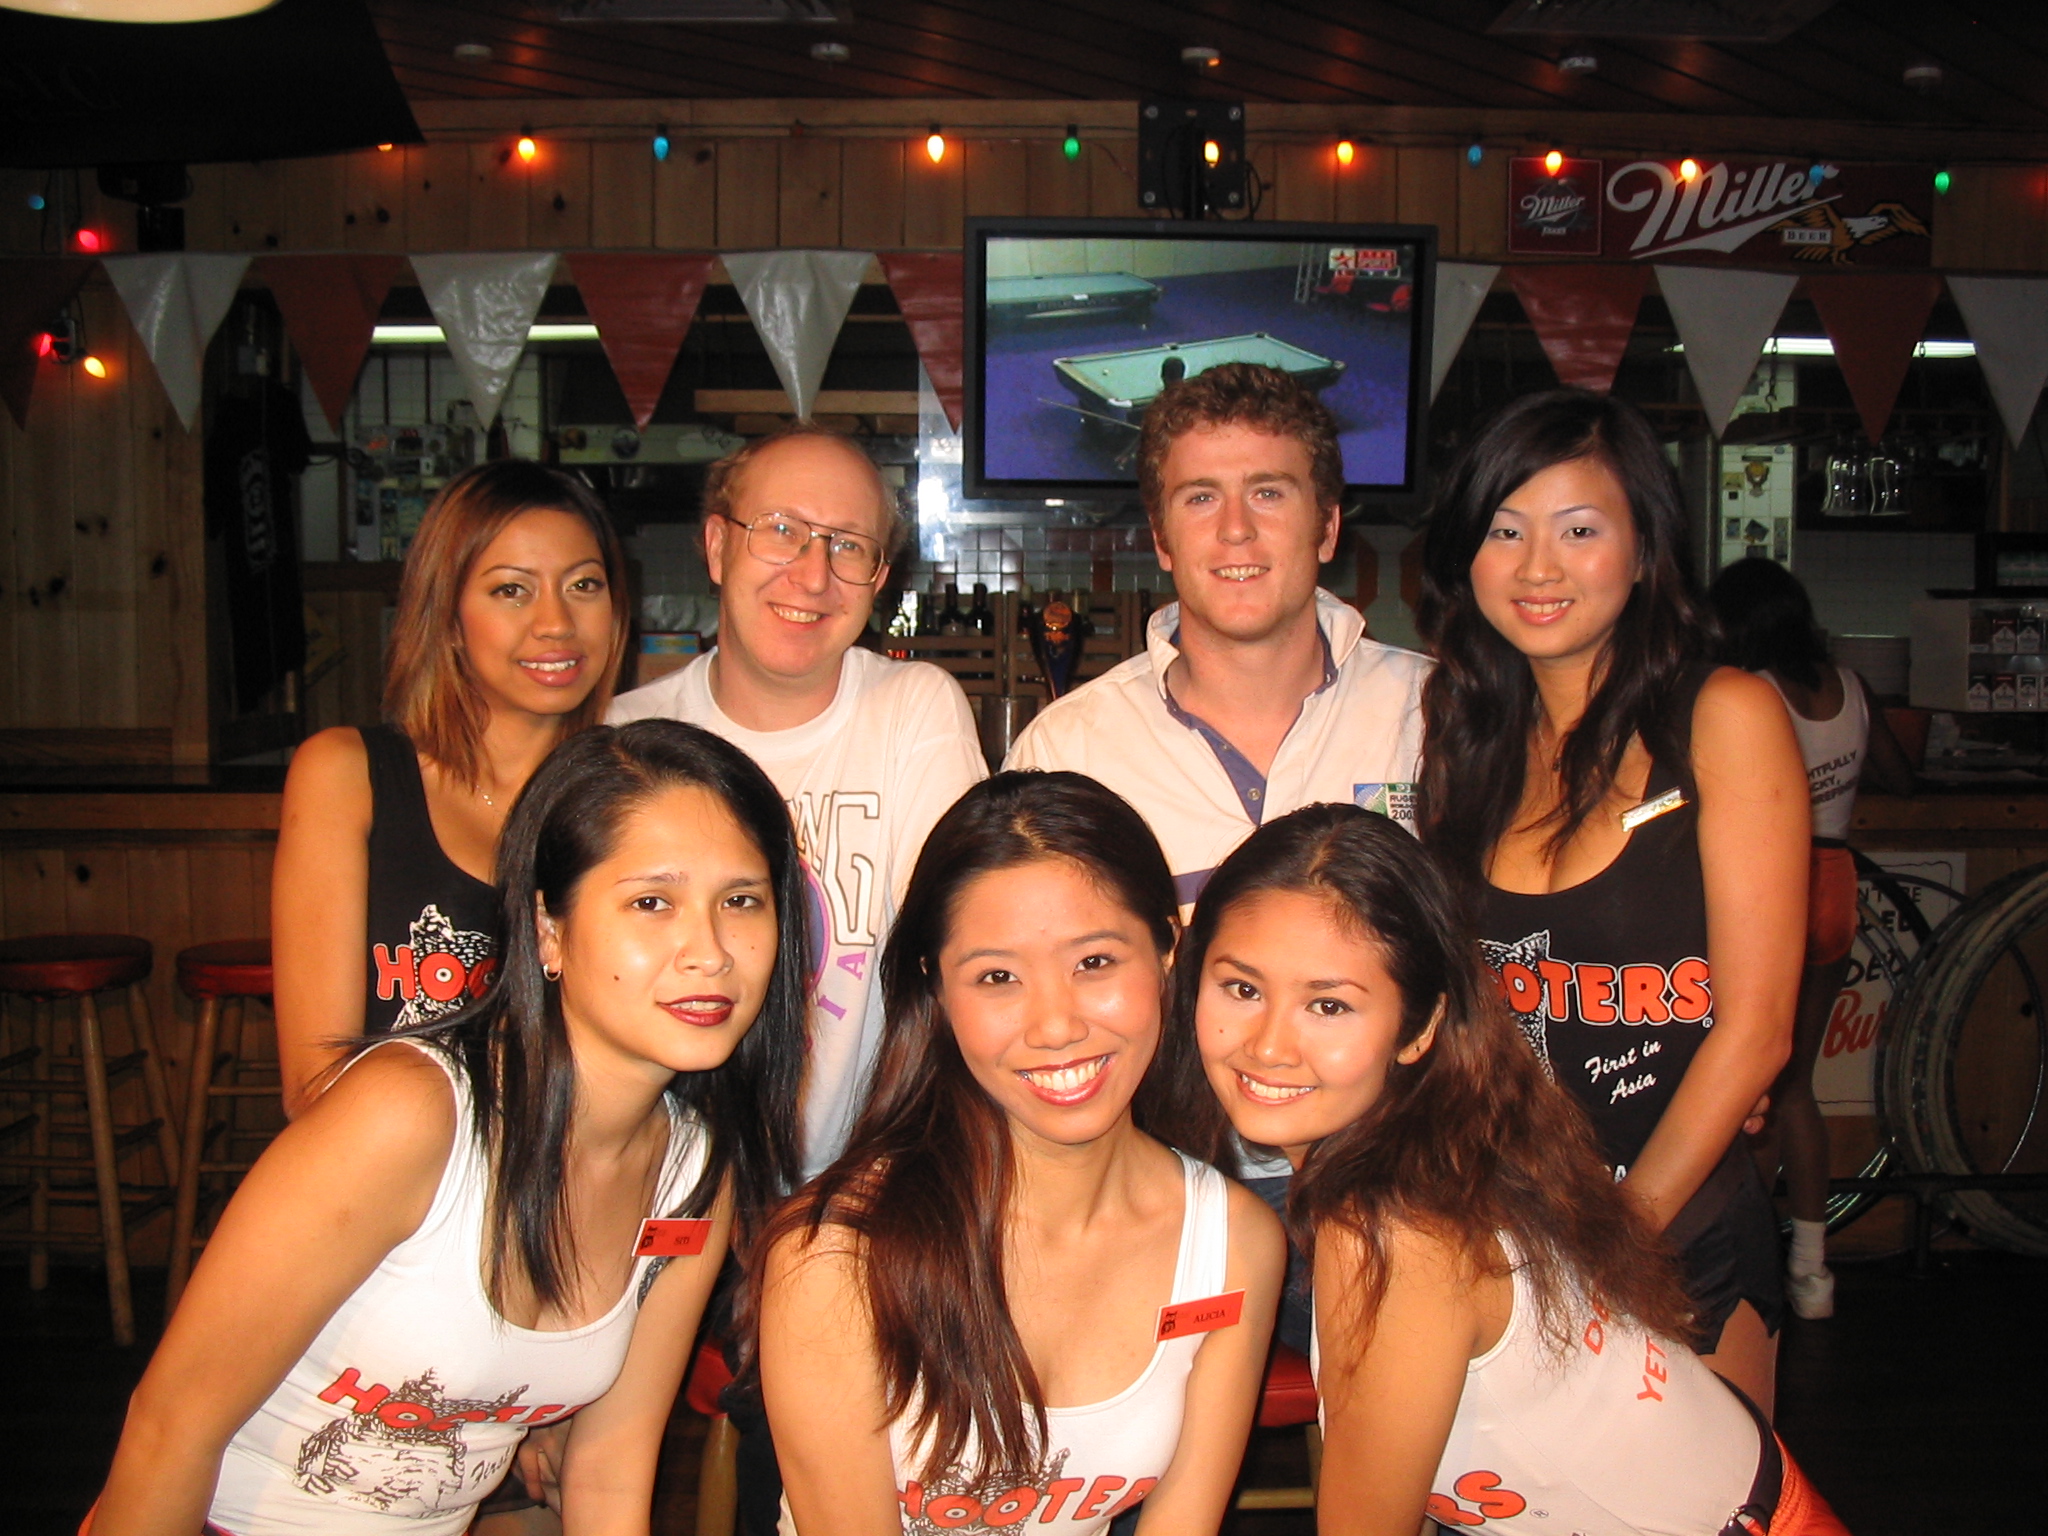 Hooters to open up in Hong Kong as part of aggressive Asia 